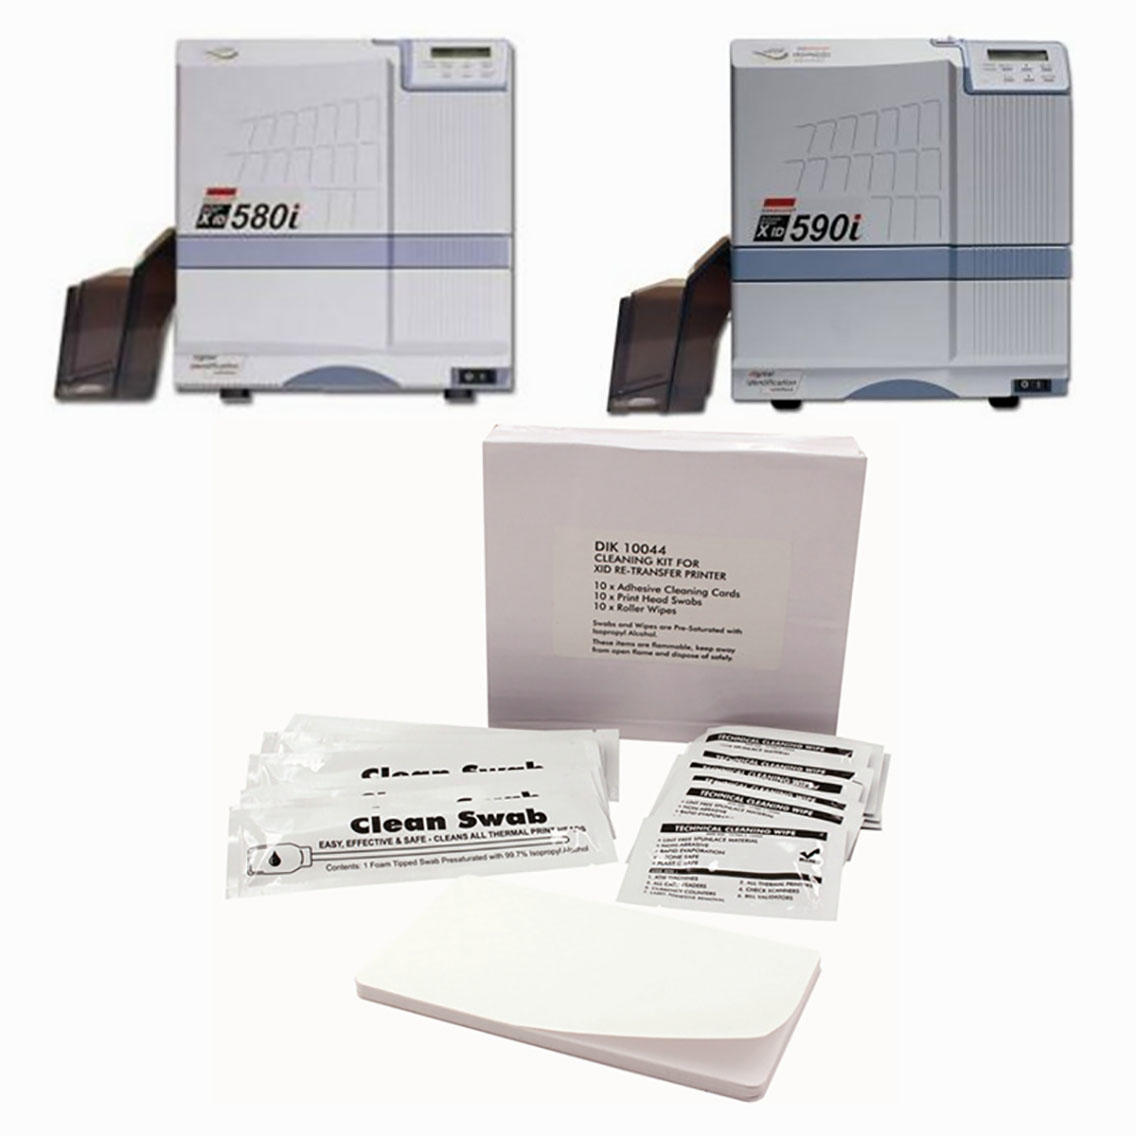 Cleanmo cost effective inkjet printhead cleaning kit manufacturer for XID 580i printer